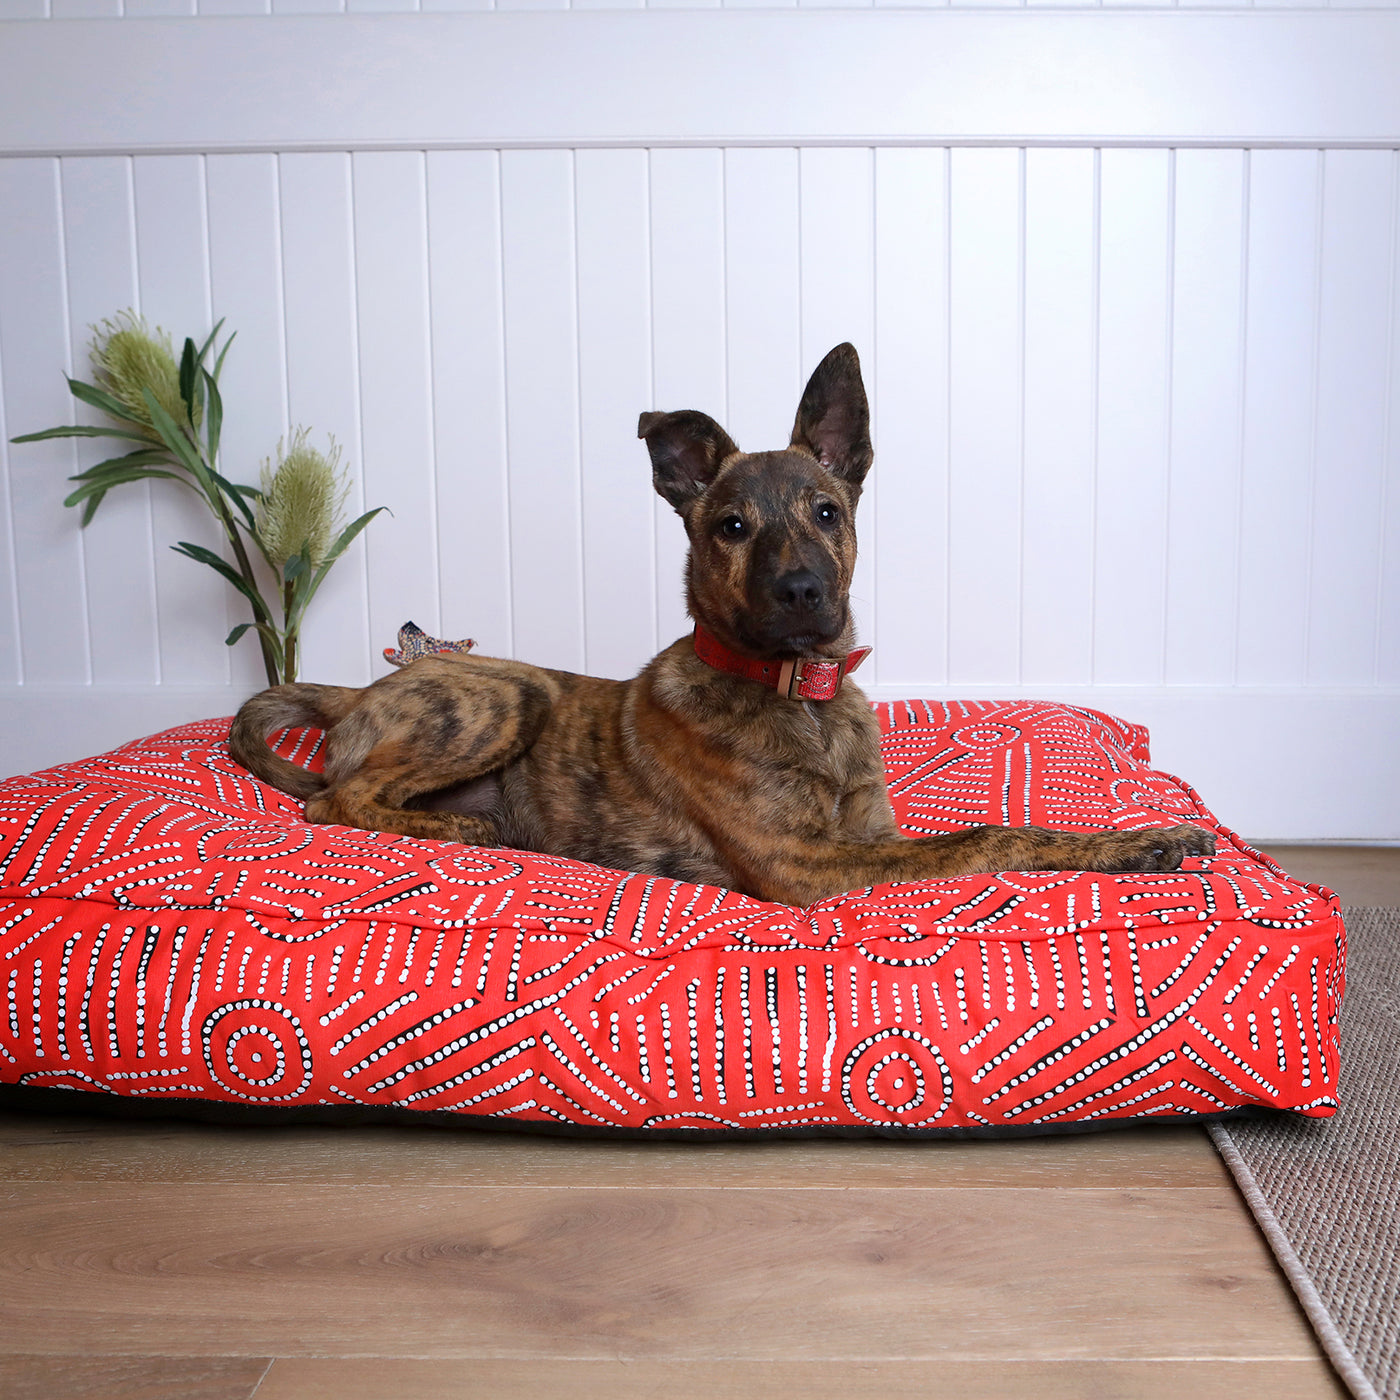 Rectangular Therapeutic Dog Bed - Water Dreaming